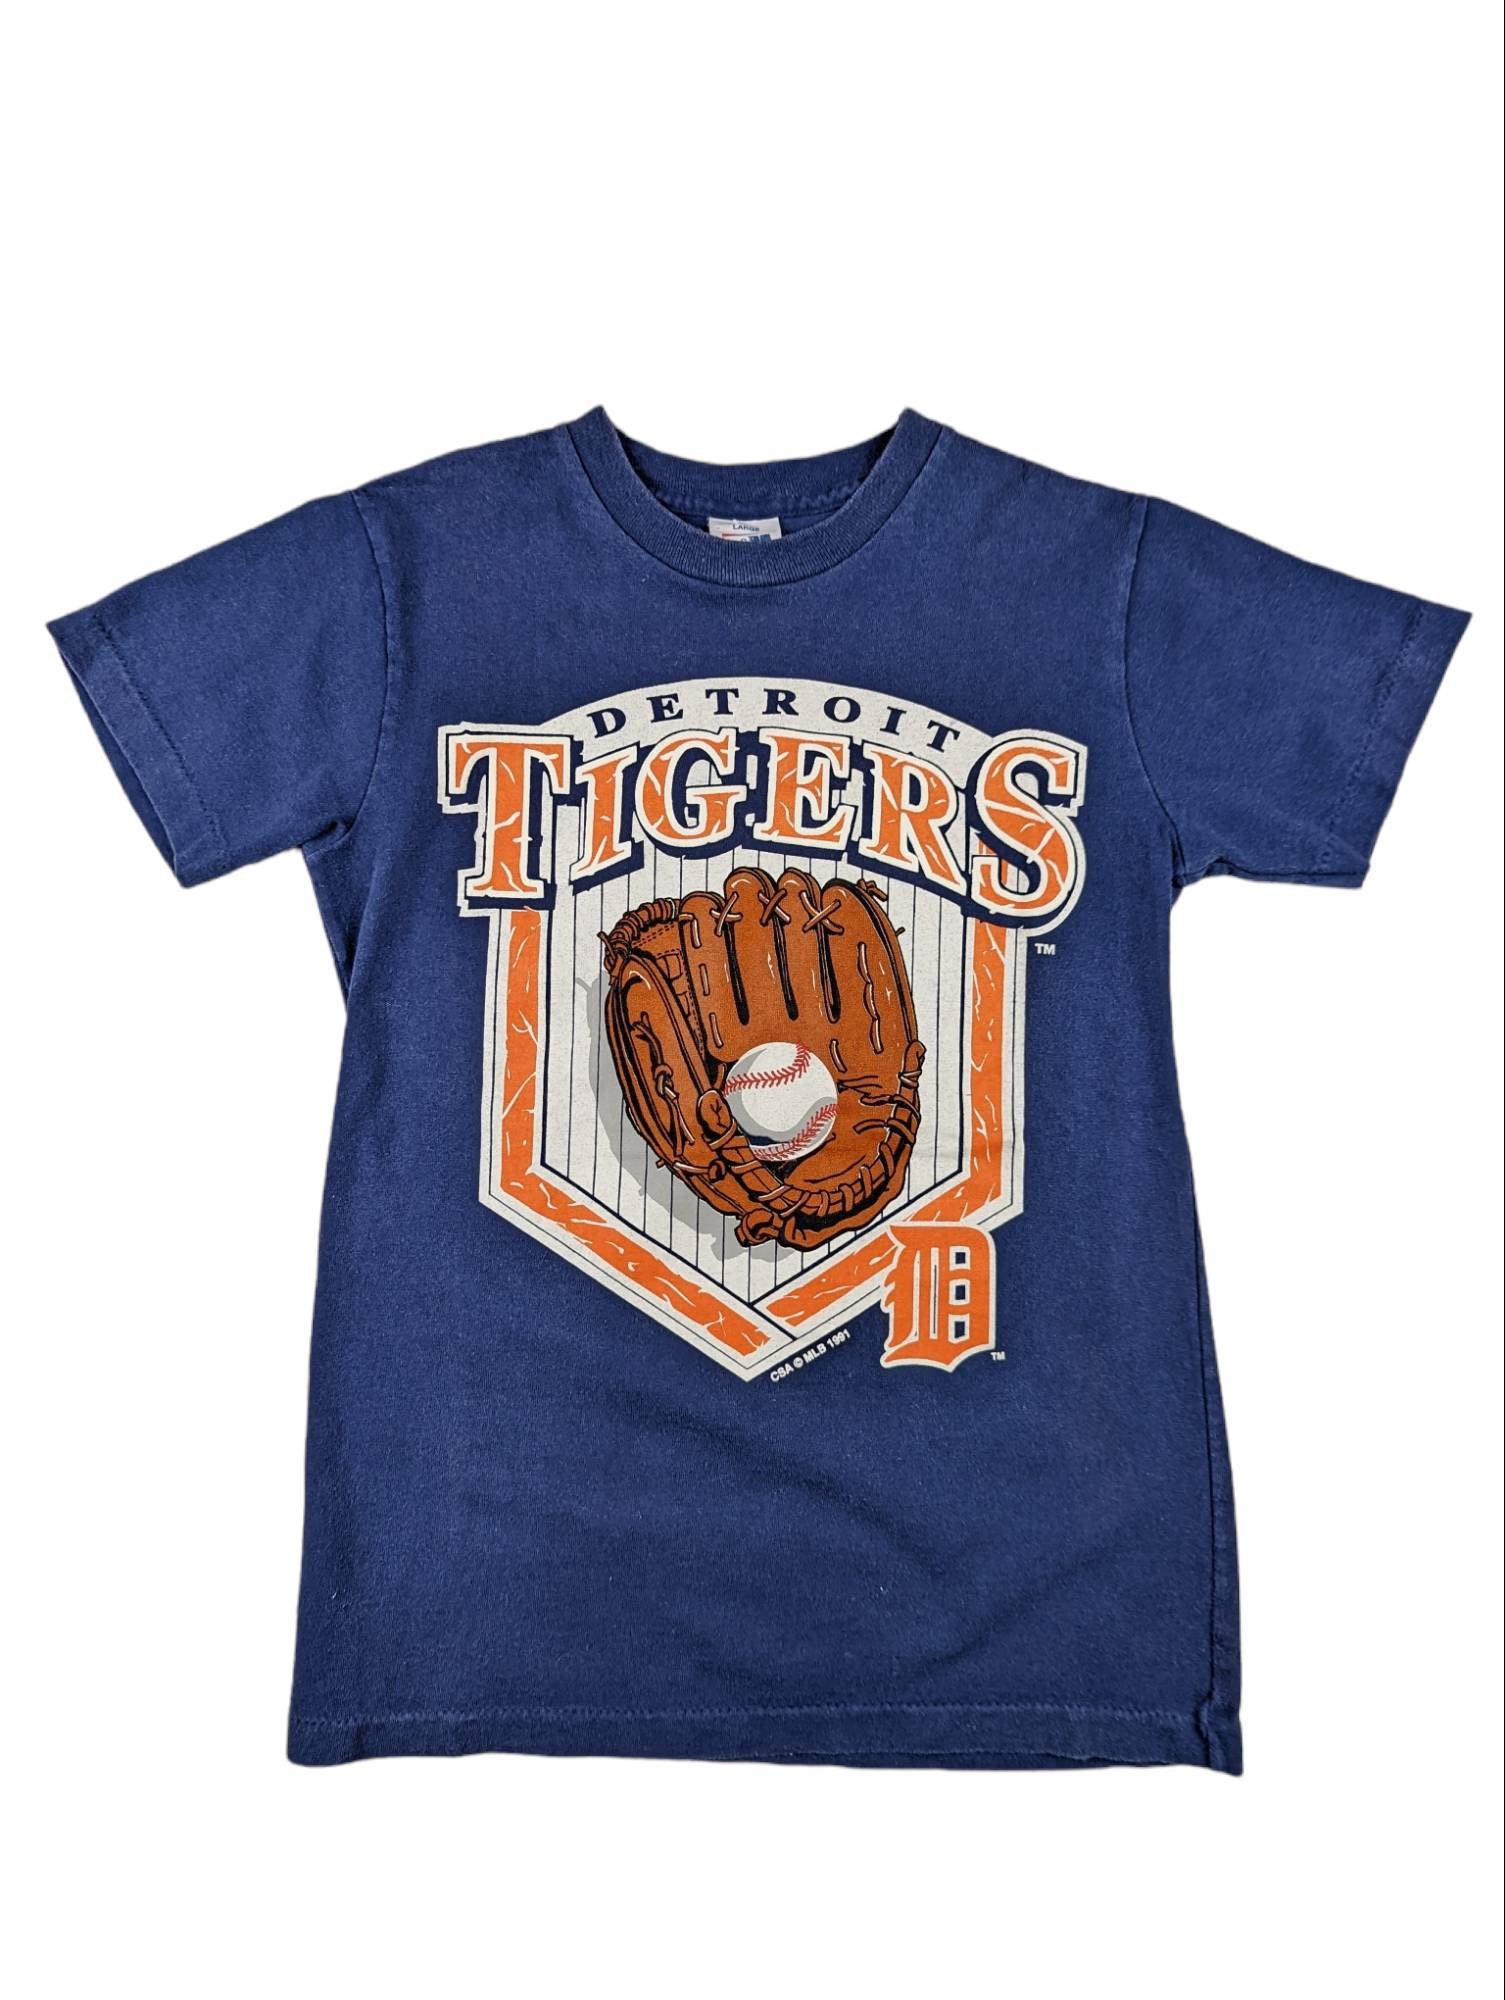 NEW Detroit Tigers Shirt Youth L Large (14-16) Pink